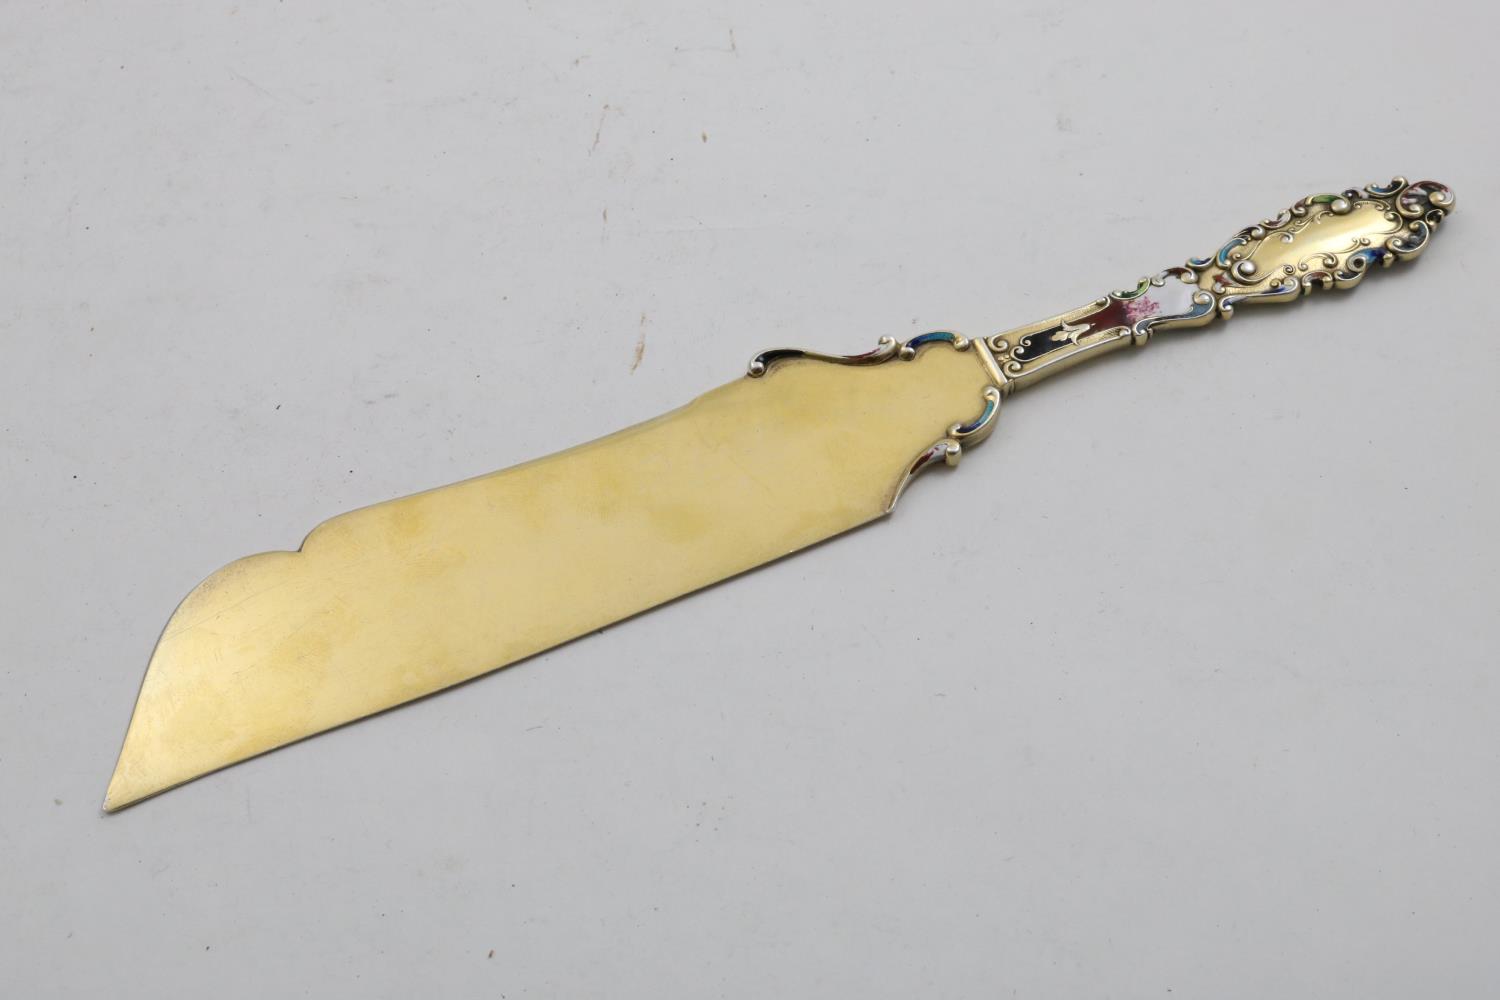 A LATE 19TH / EARLY 20TH CENTURY AMERICAN SILVERGILT AND ENAMEL SERVING SLICE for dessert or cake,